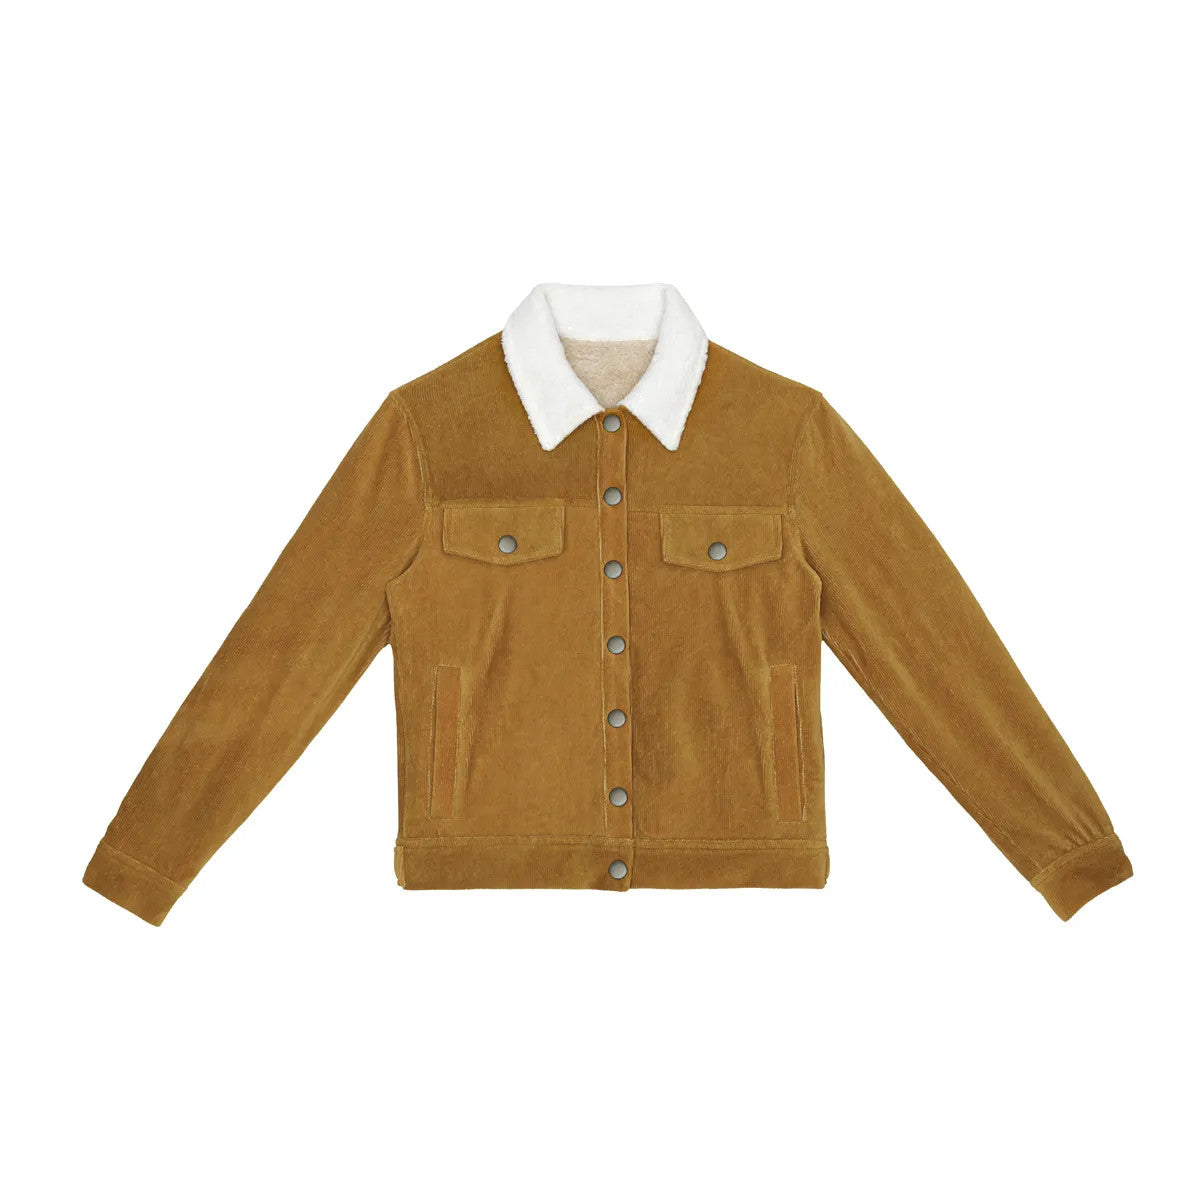 This Little Hedonist unisex organic cotton trucker jacket is THE jacket for the fall season. Warm teddy inside and easy to open and close with push buttons. Wear it as an overshirt or a jacket.